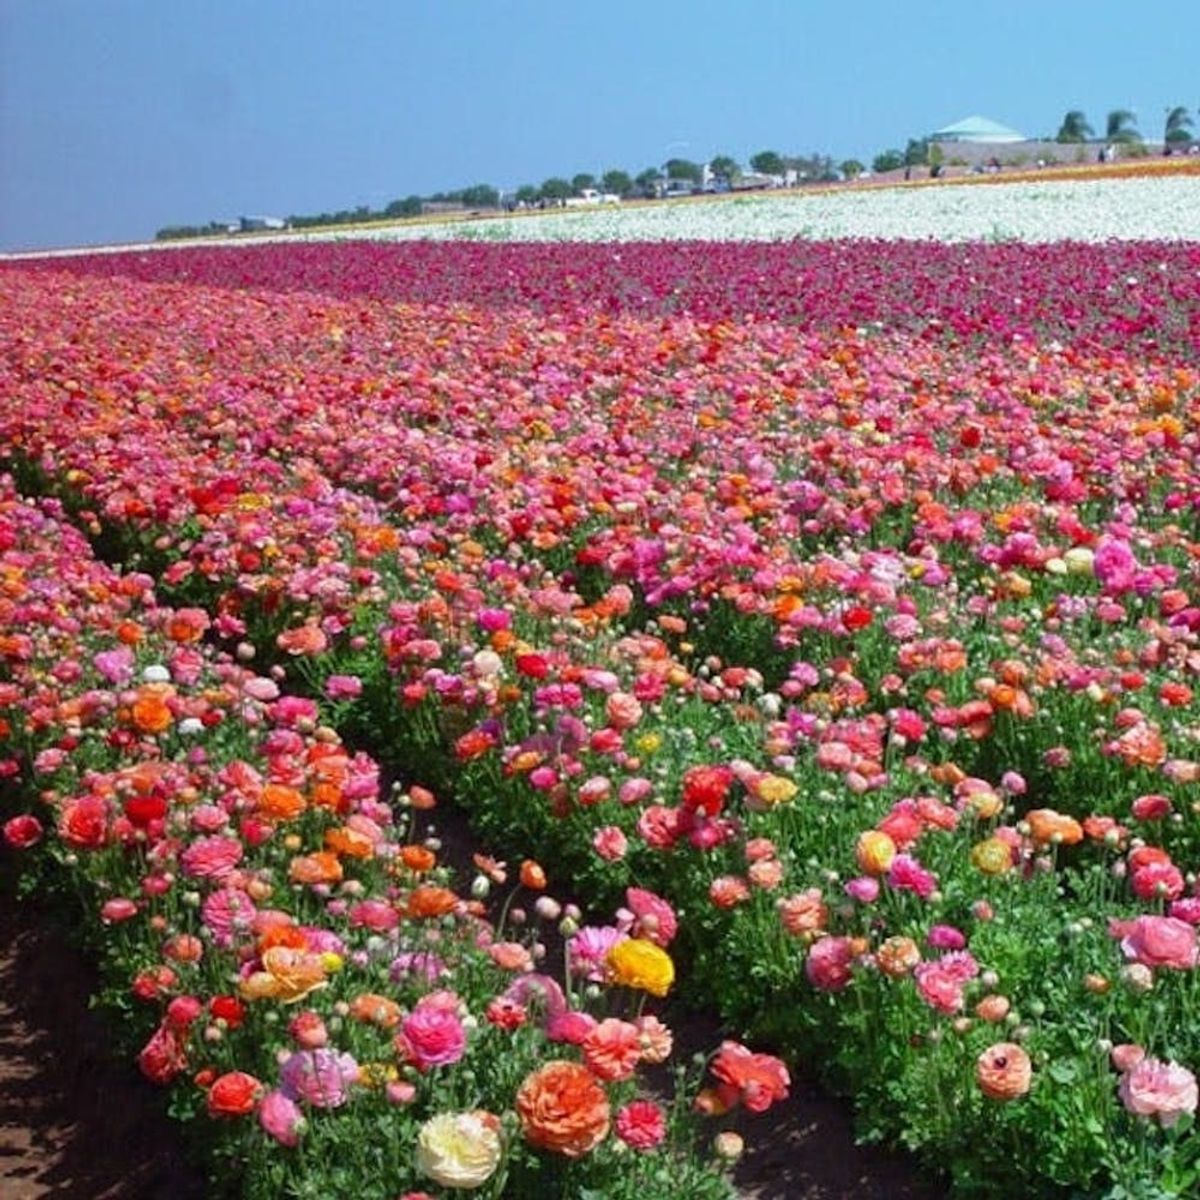 10 Stunning Places to See Flowers in the US